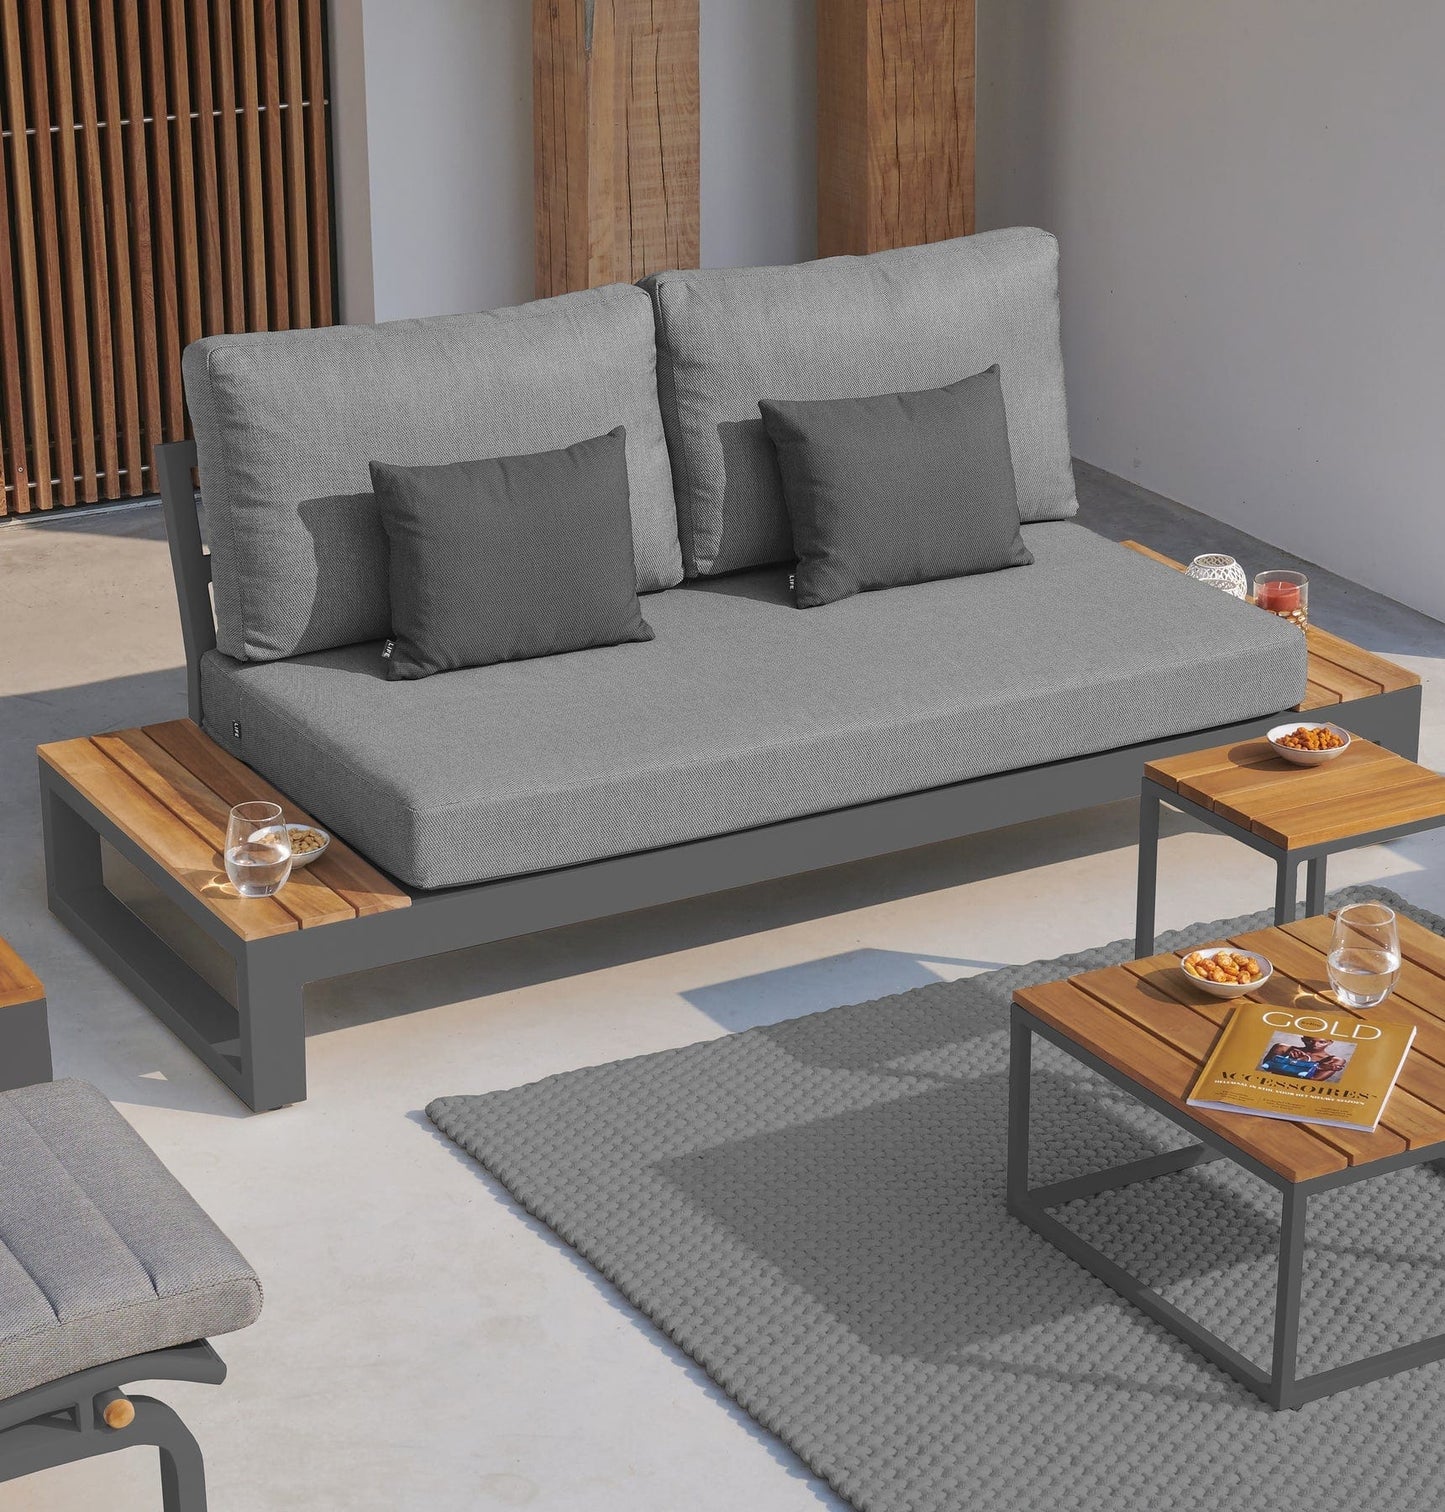 SoHo Set with weather resistant cushions